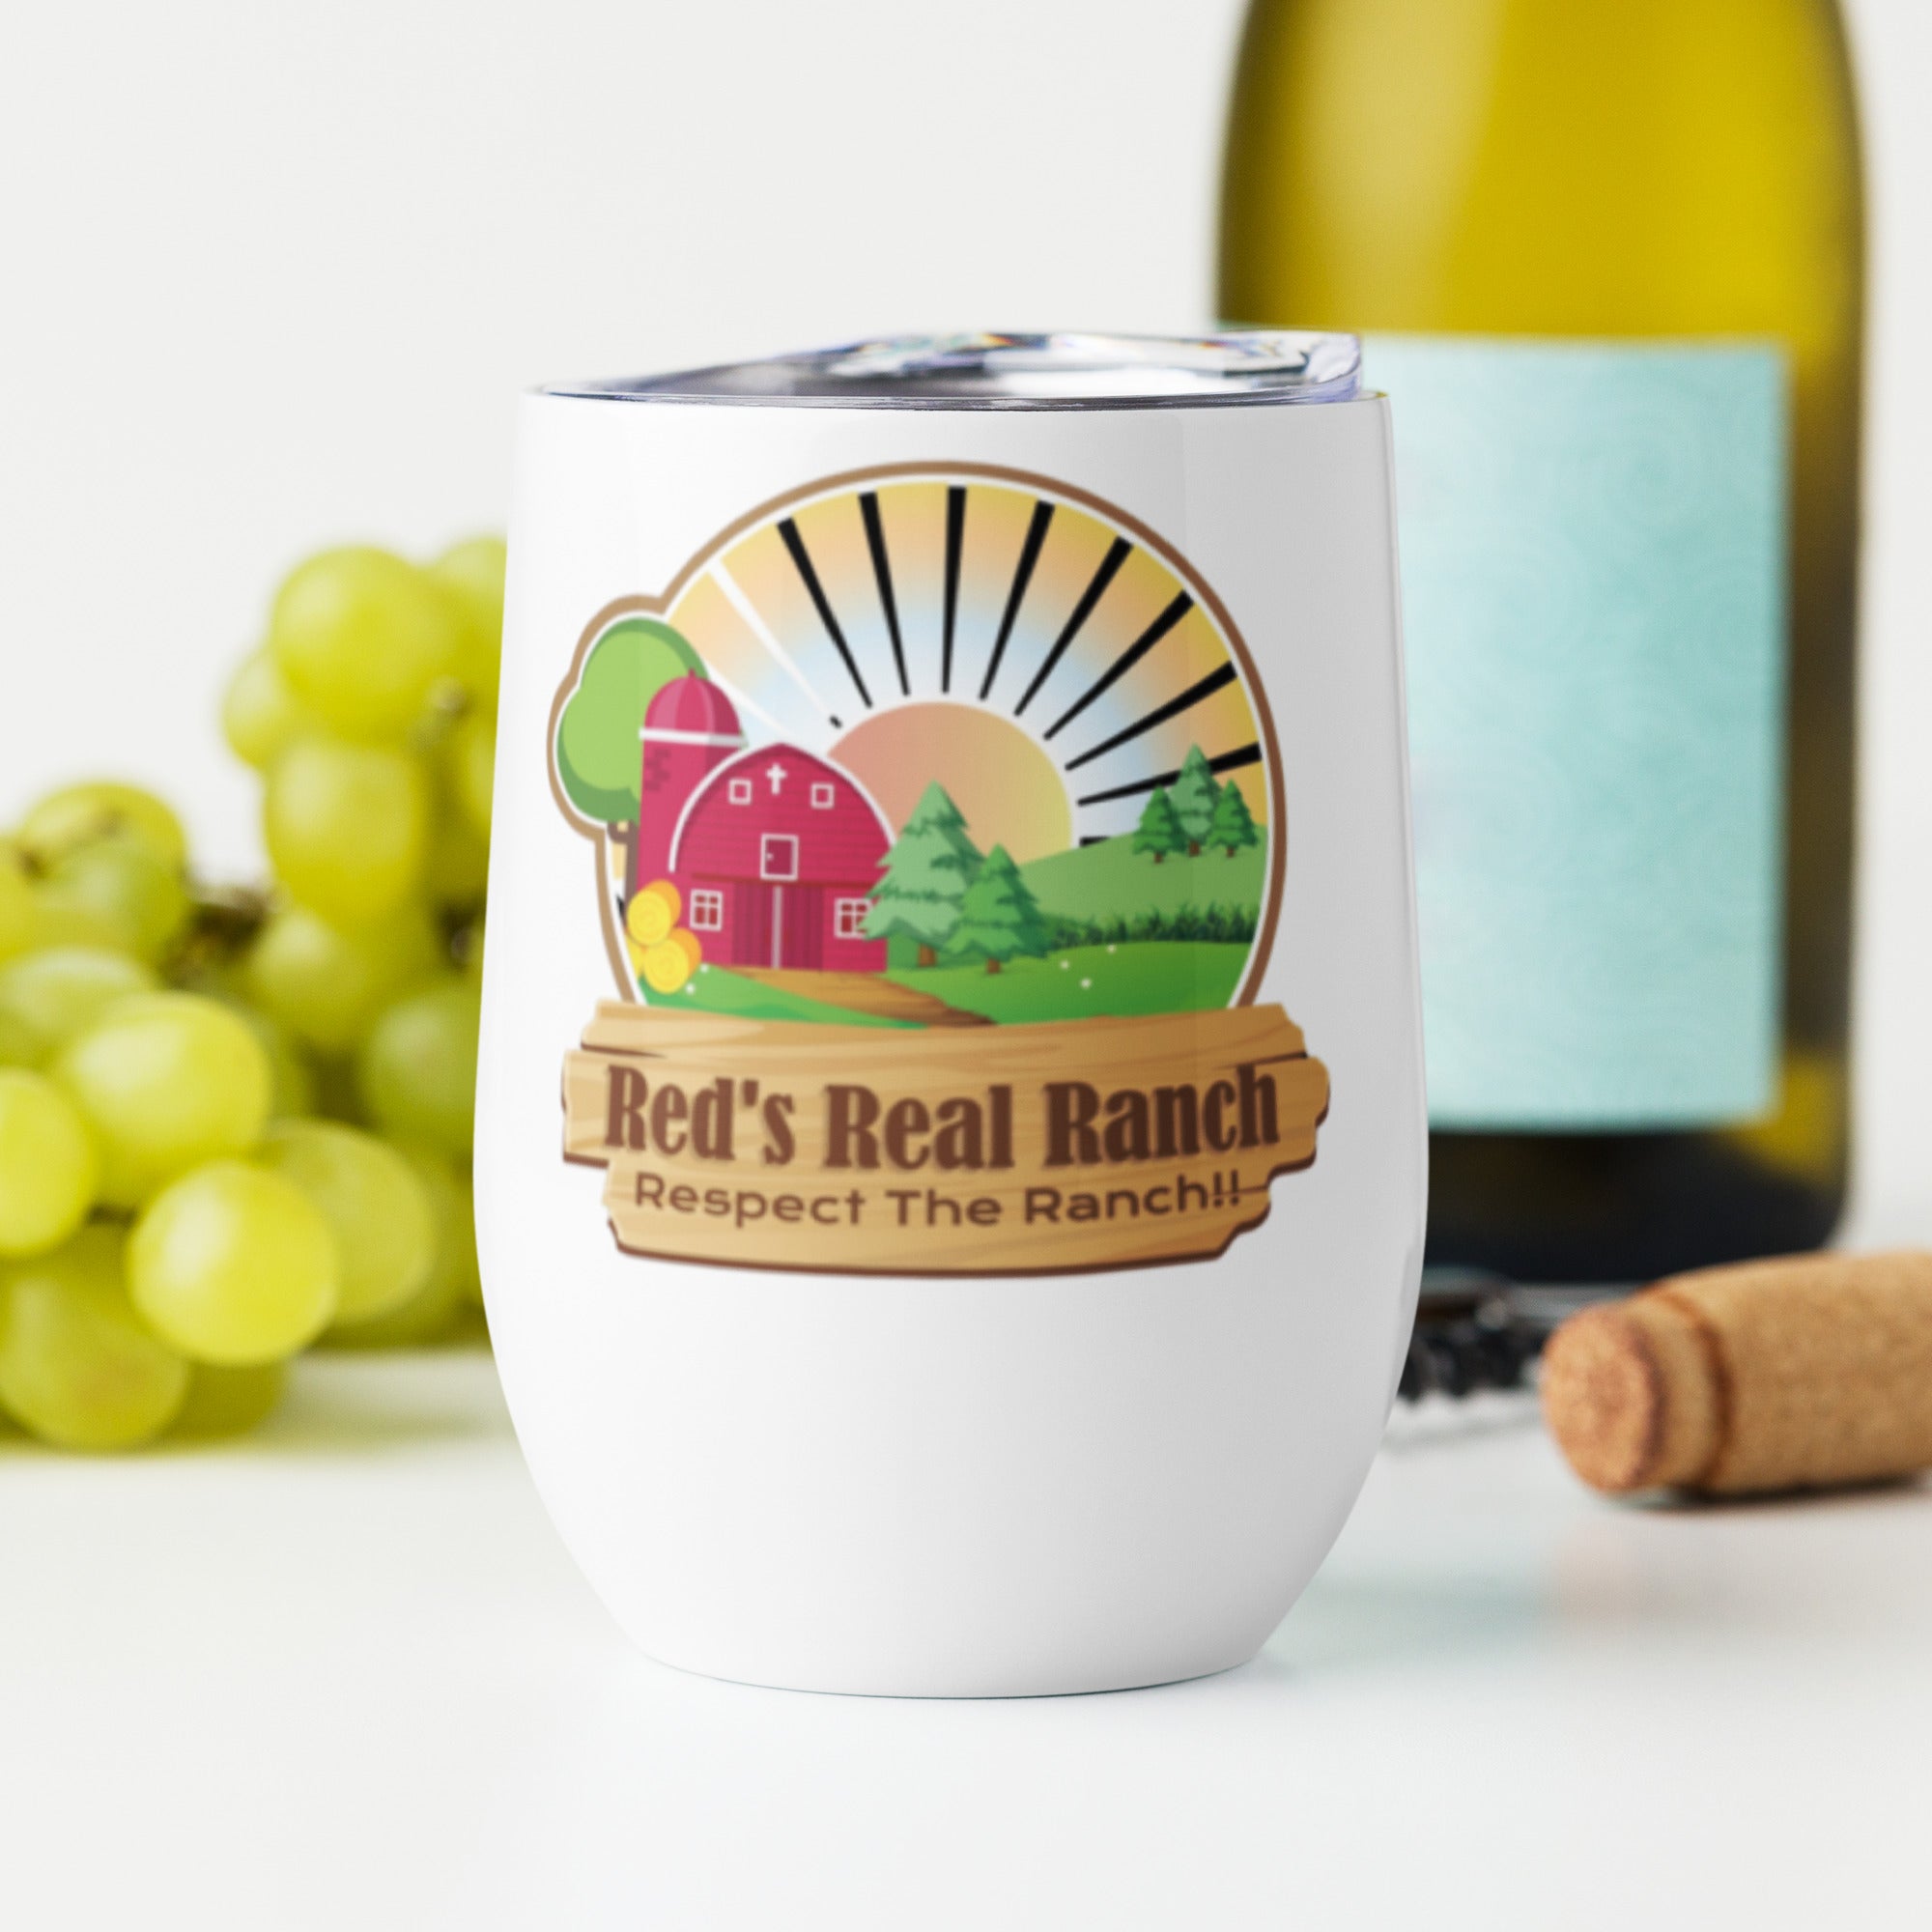 "Reds Real Ranch" Wine tumbler